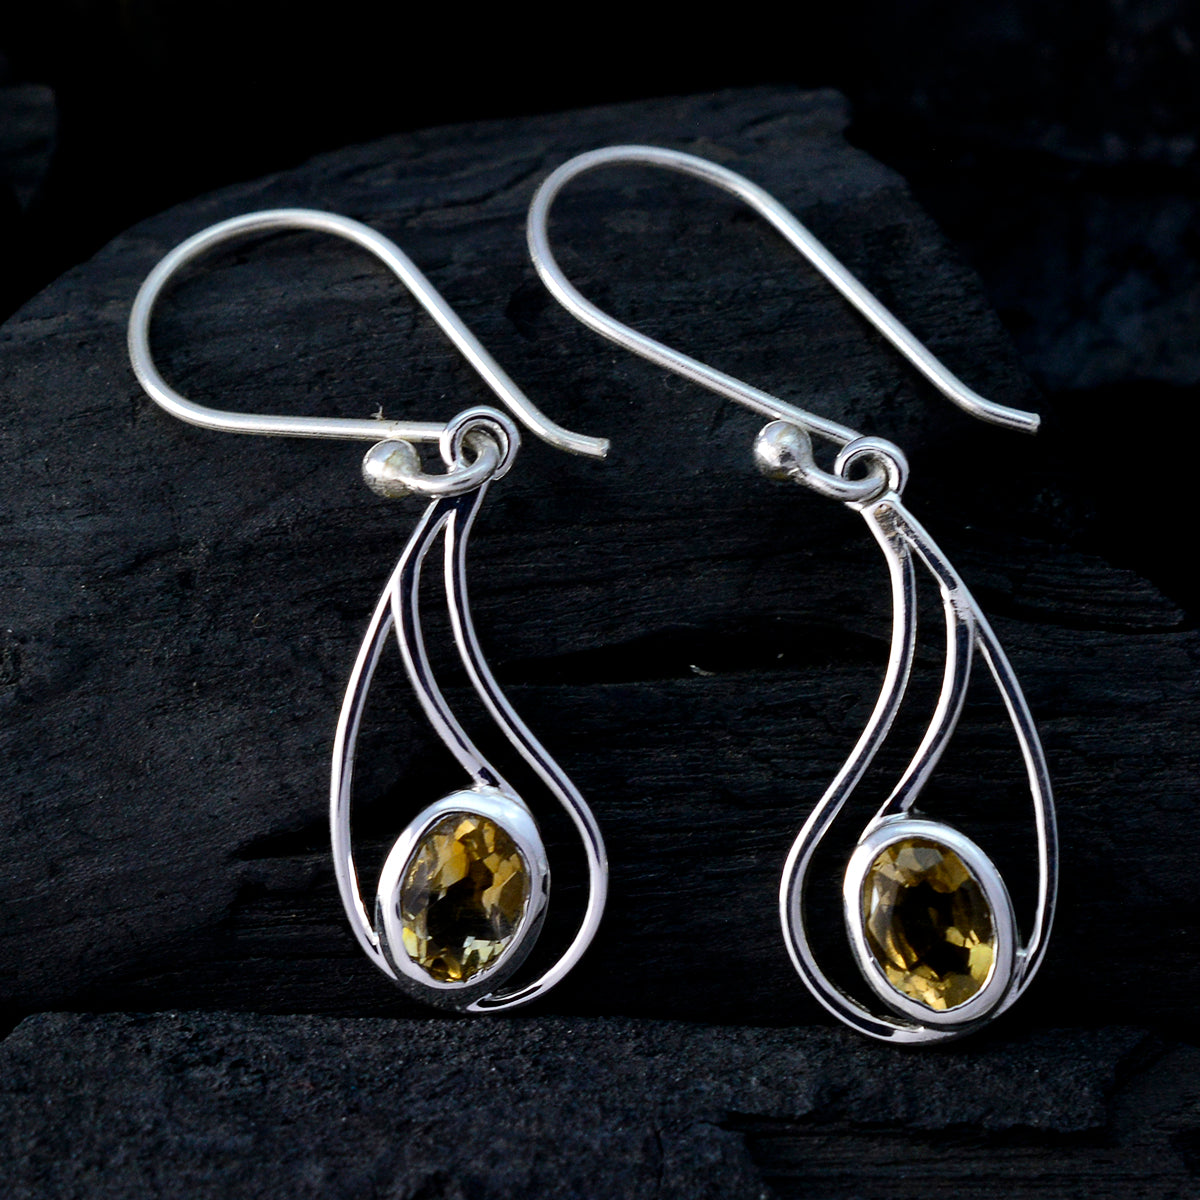 Riyo Real Gemstones oval Faceted Yellow Citrine Silver Earring wedding gift